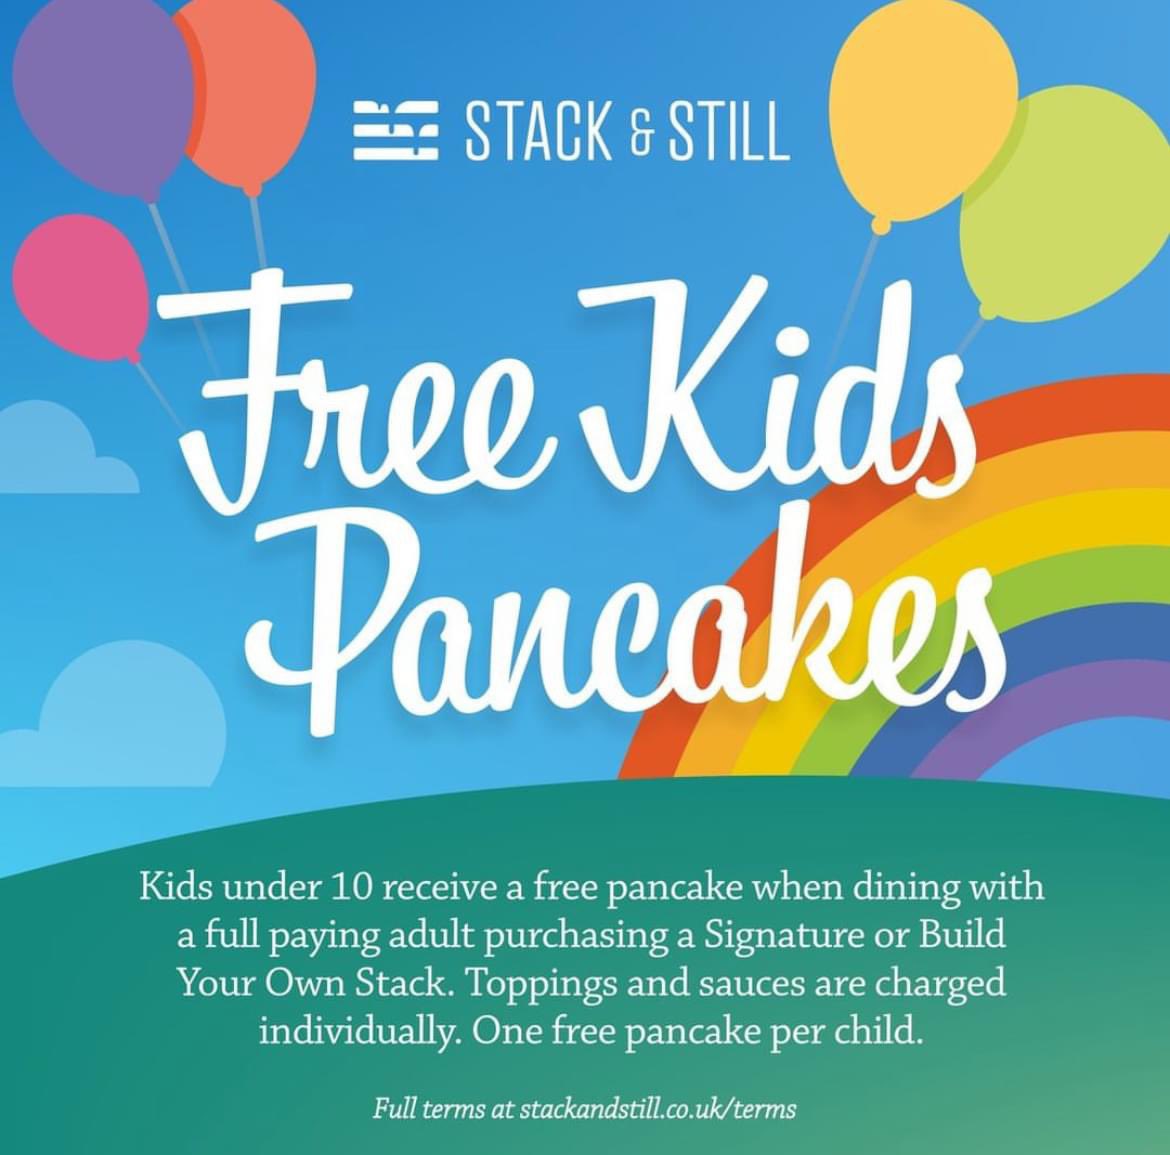 Still soaking up the last moments of the Easter holidays? Feeling a bit stuck on ideas to entertain the little ones? @stackandstill are offering free kids pancakes when dining with a full paying adult! 🥞✨